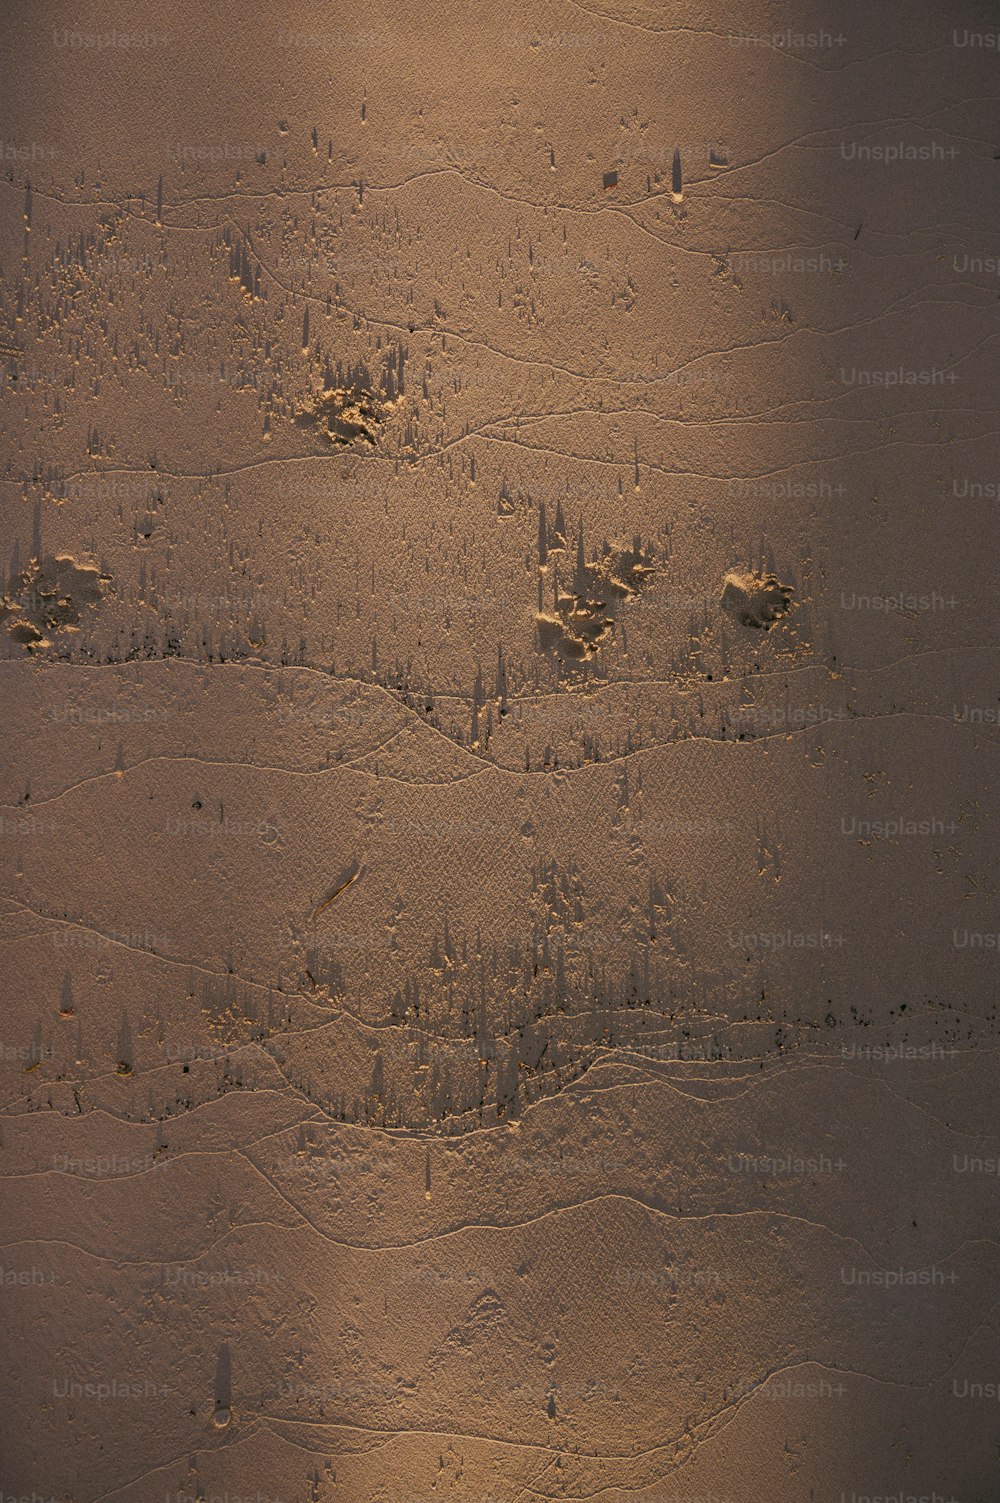 a picture of some animals tracks in the snow